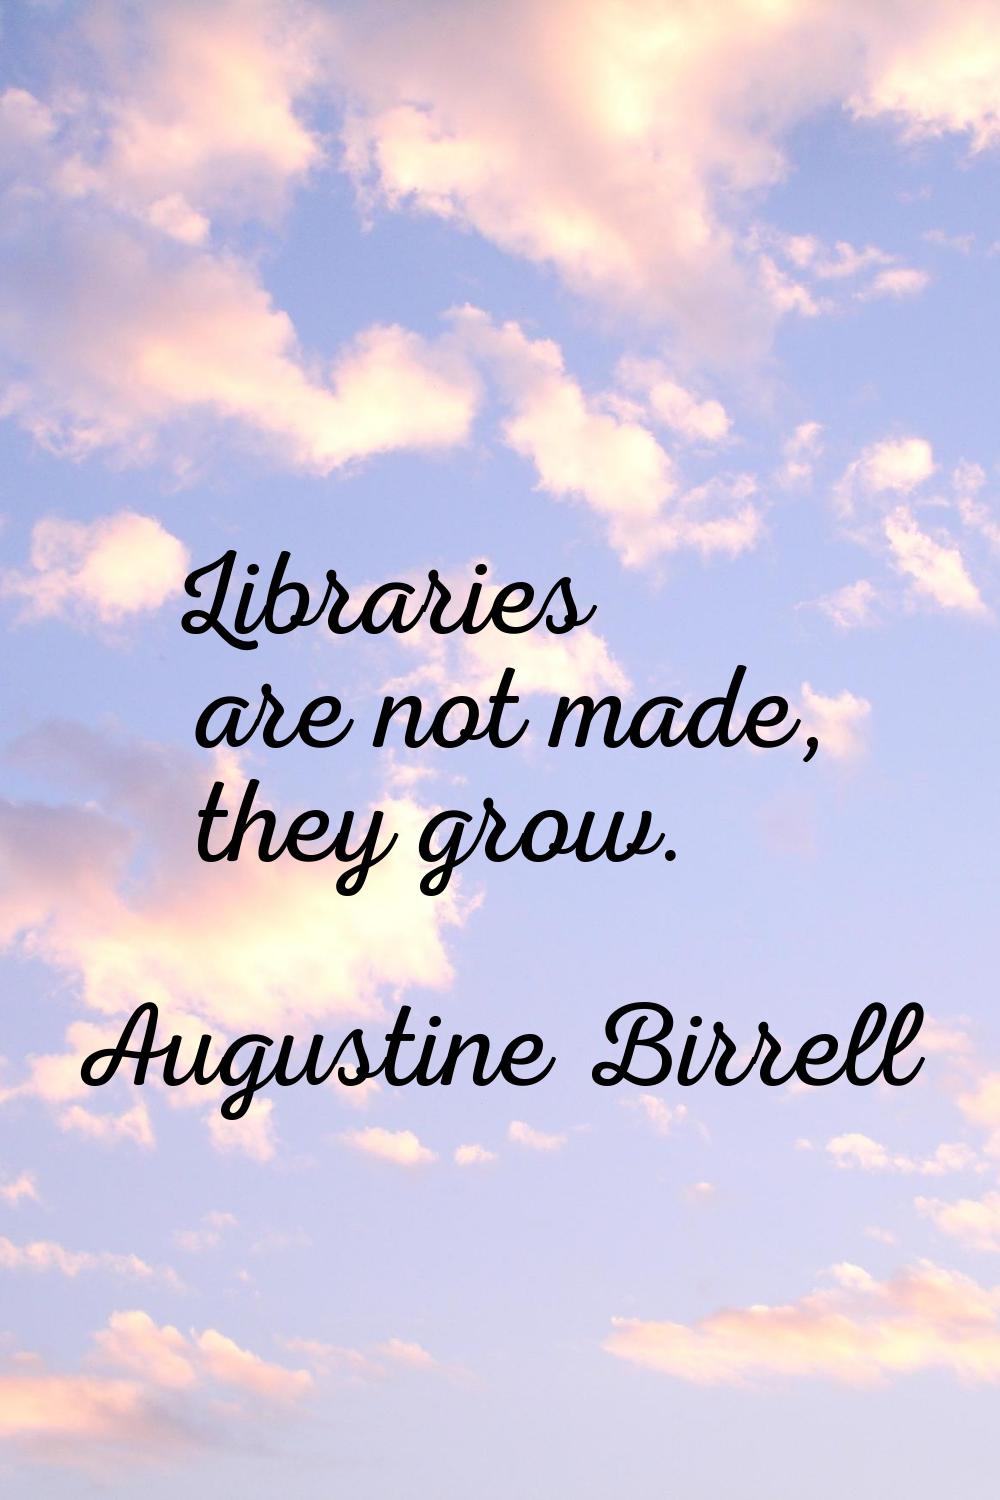 Libraries are not made, they grow.